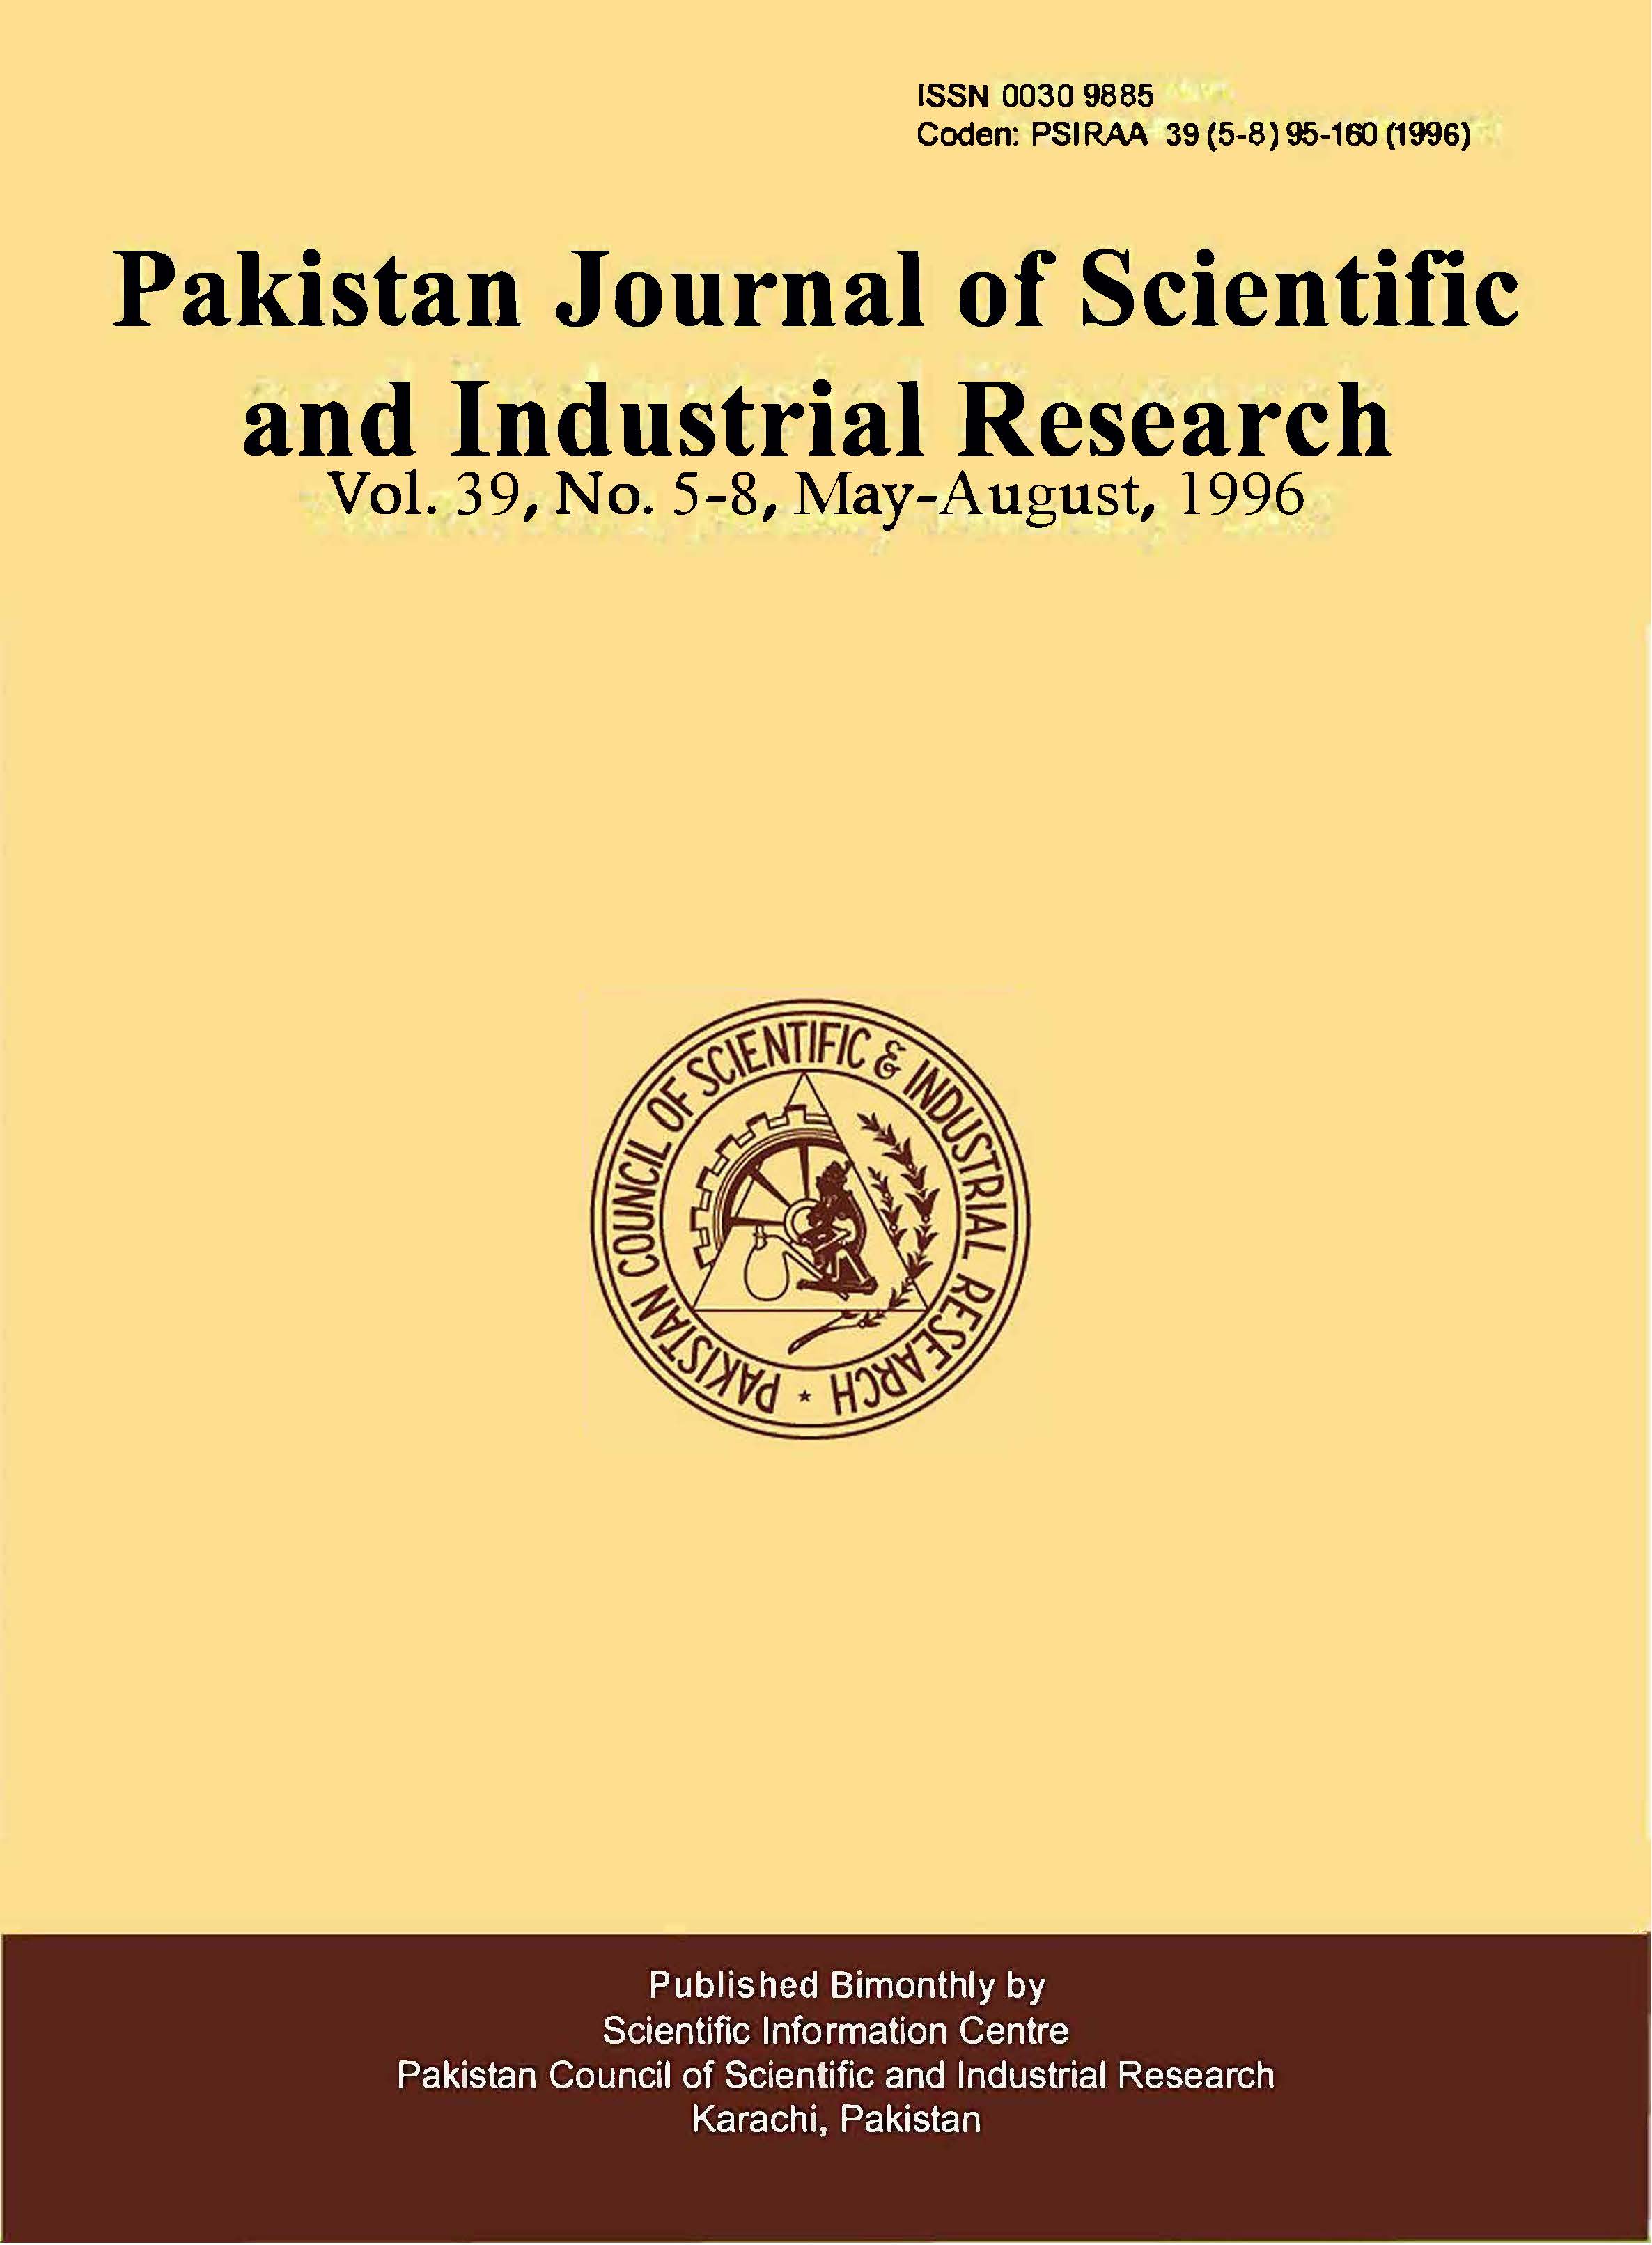 					View Vol. 39 No. 5-8 (1996): Pakistan Journal of Scientific and Industrial Research
				